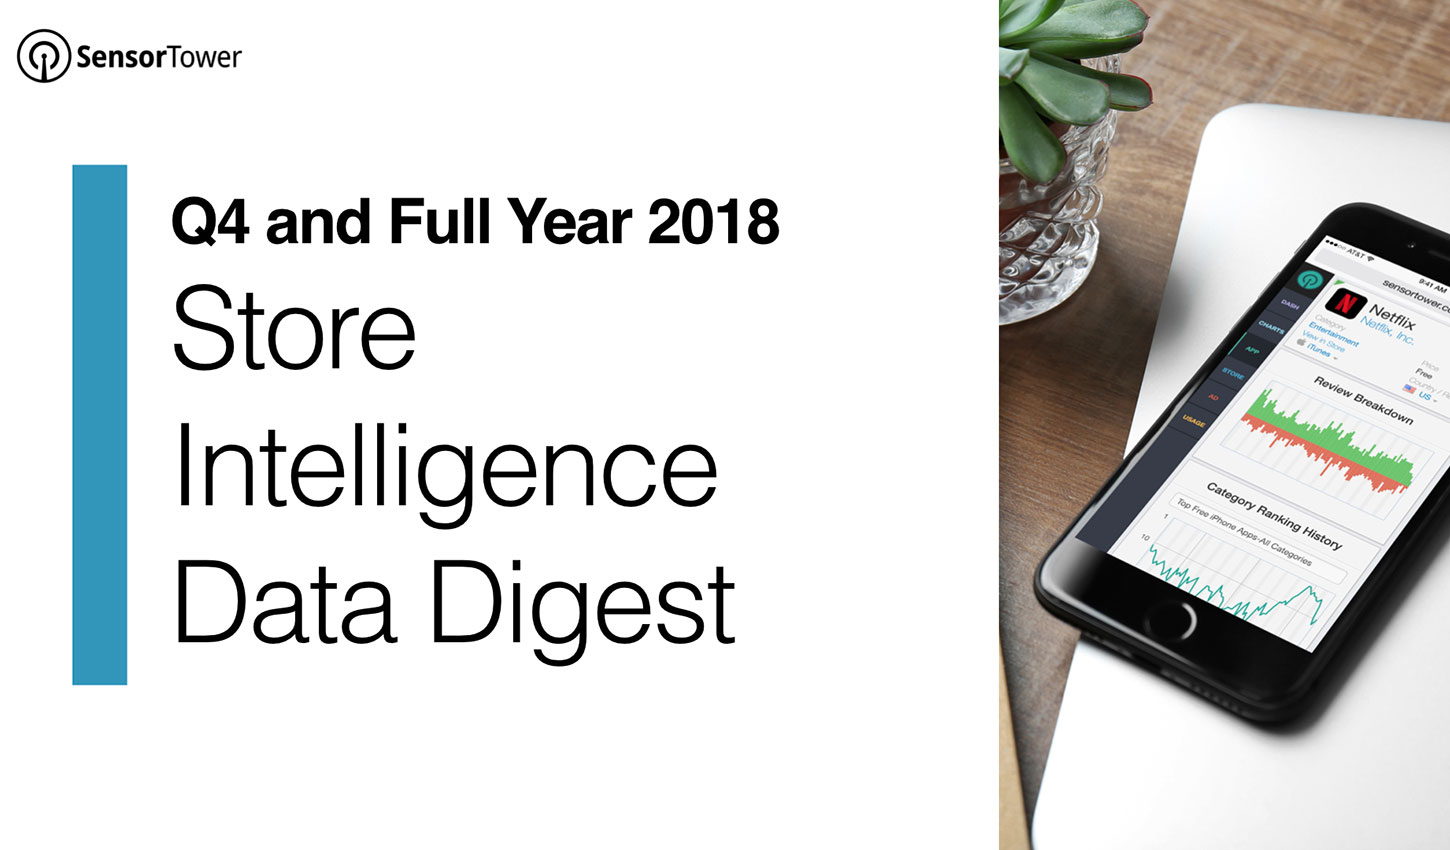 Cover of Sensor Tower's Q4 2018 Data Digest